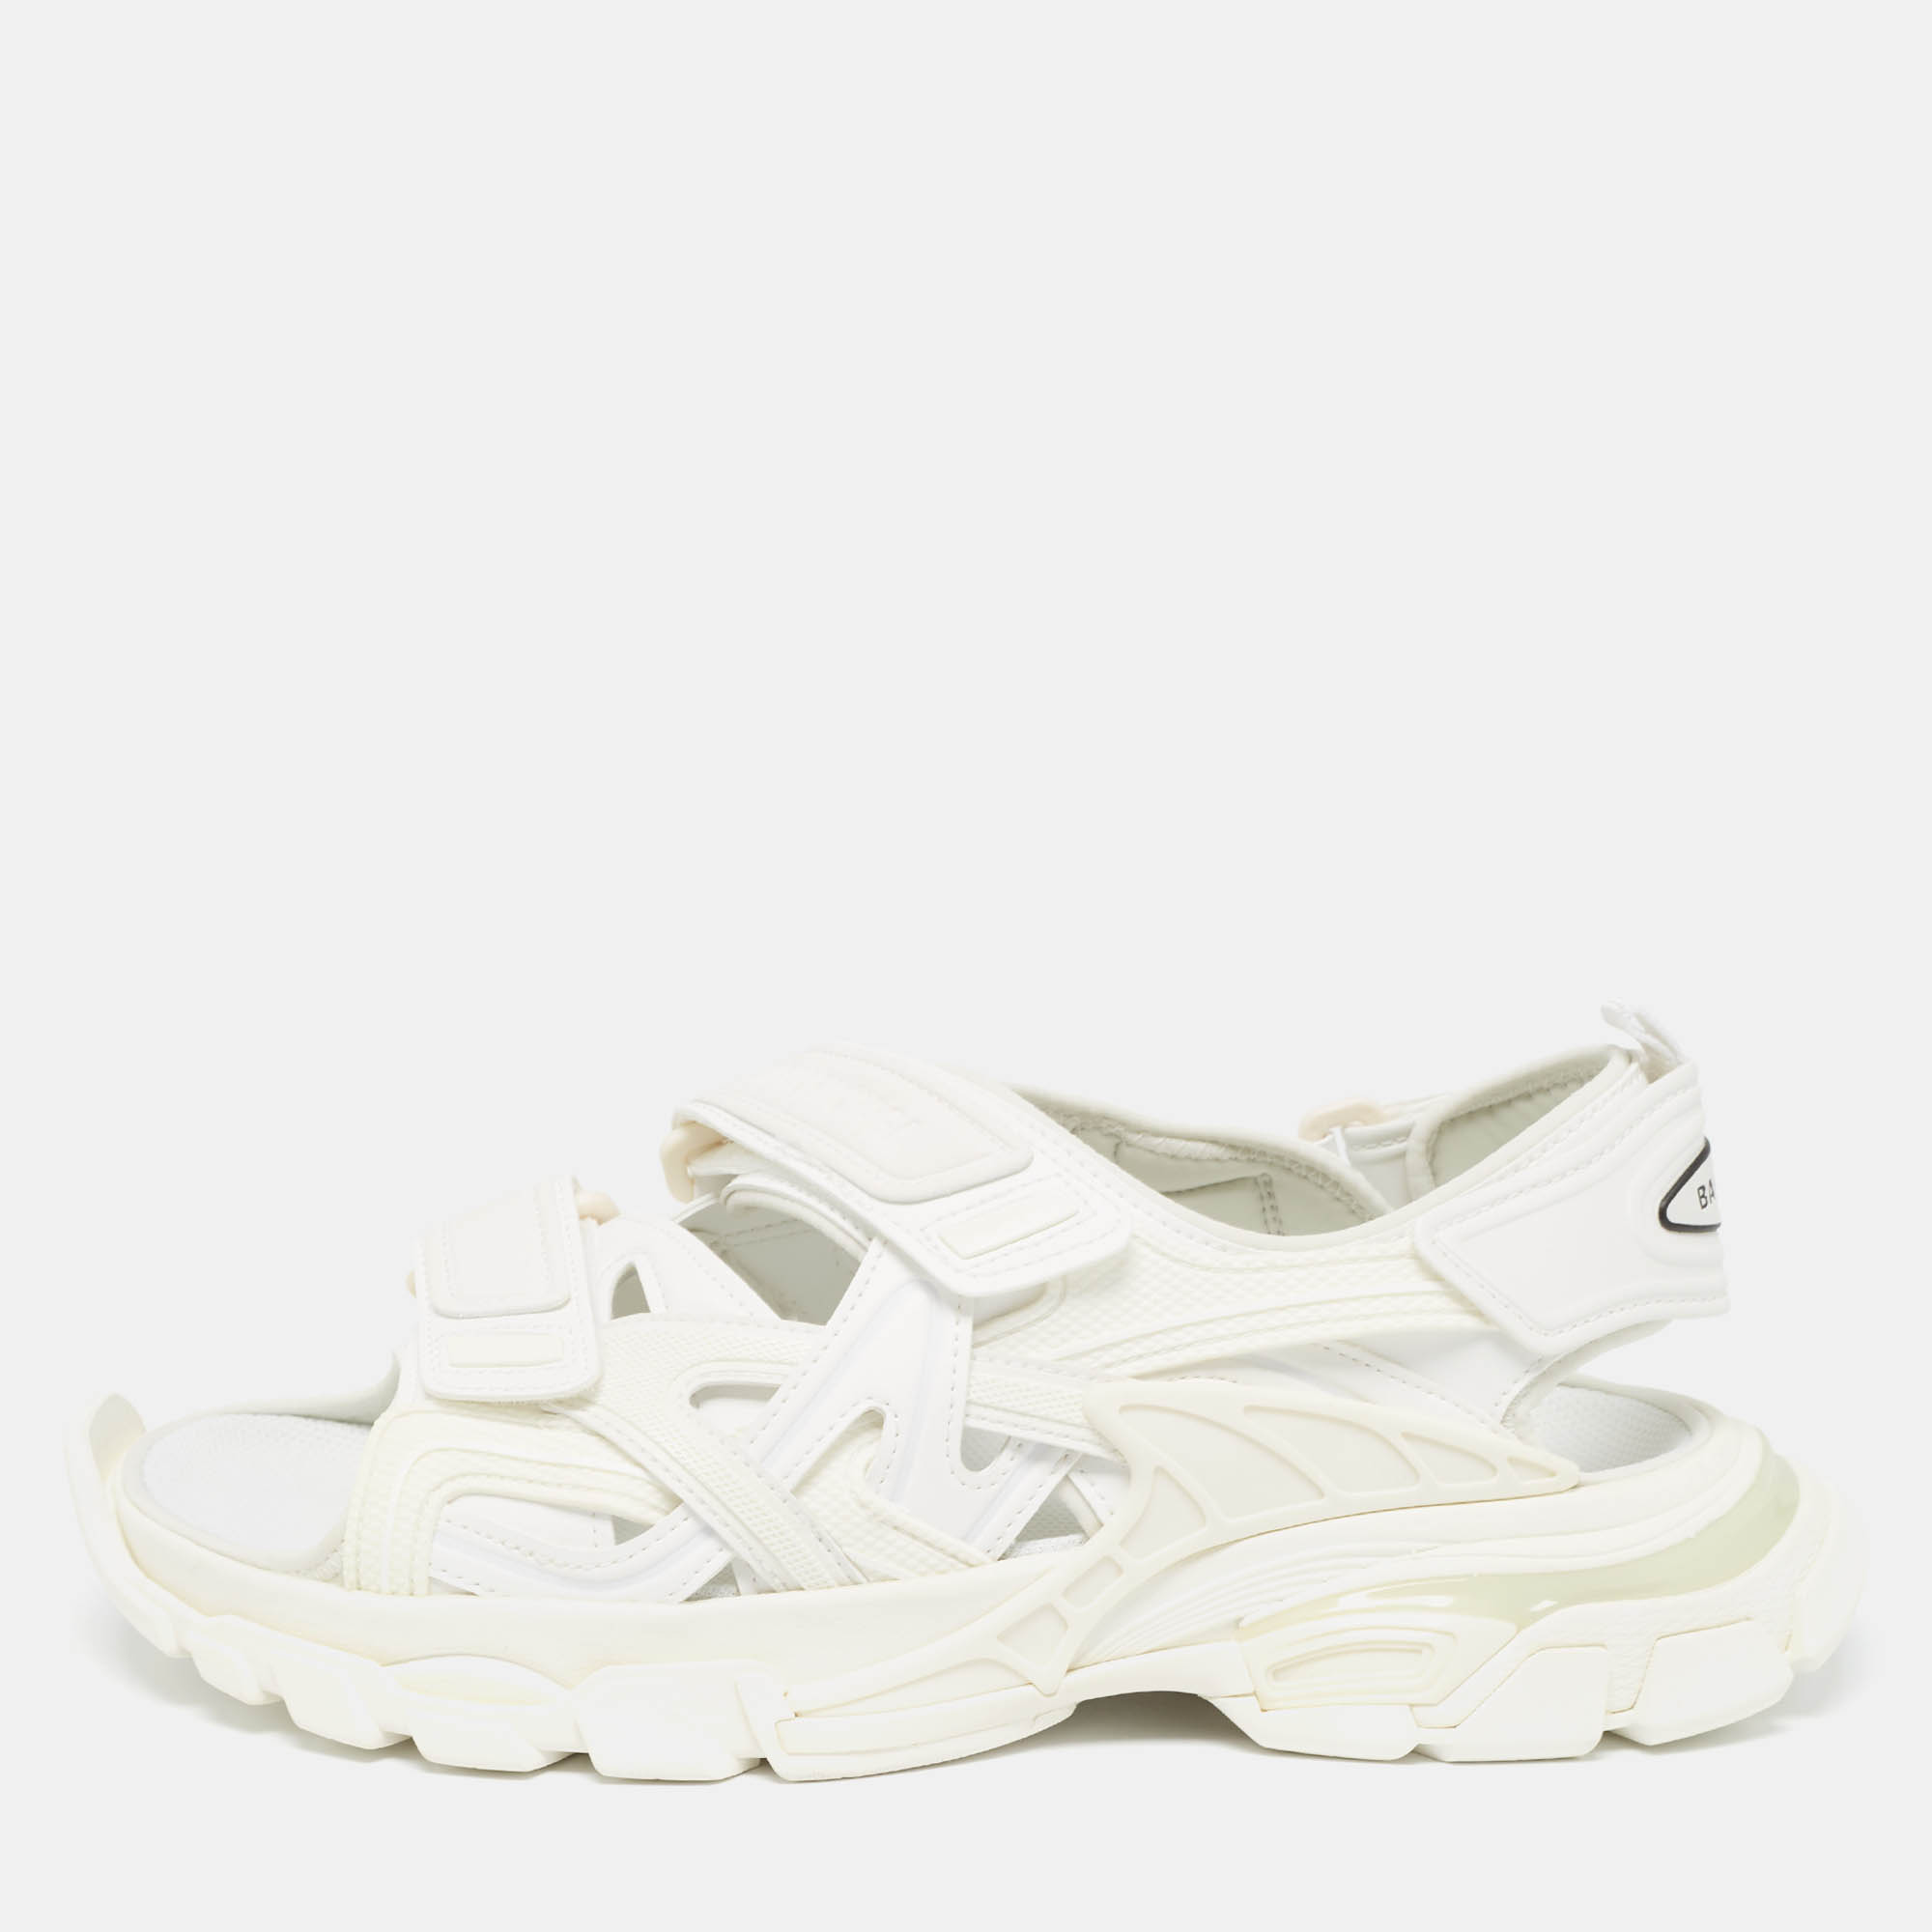 Balenciaga white rubber and faux leather track sandals size 42